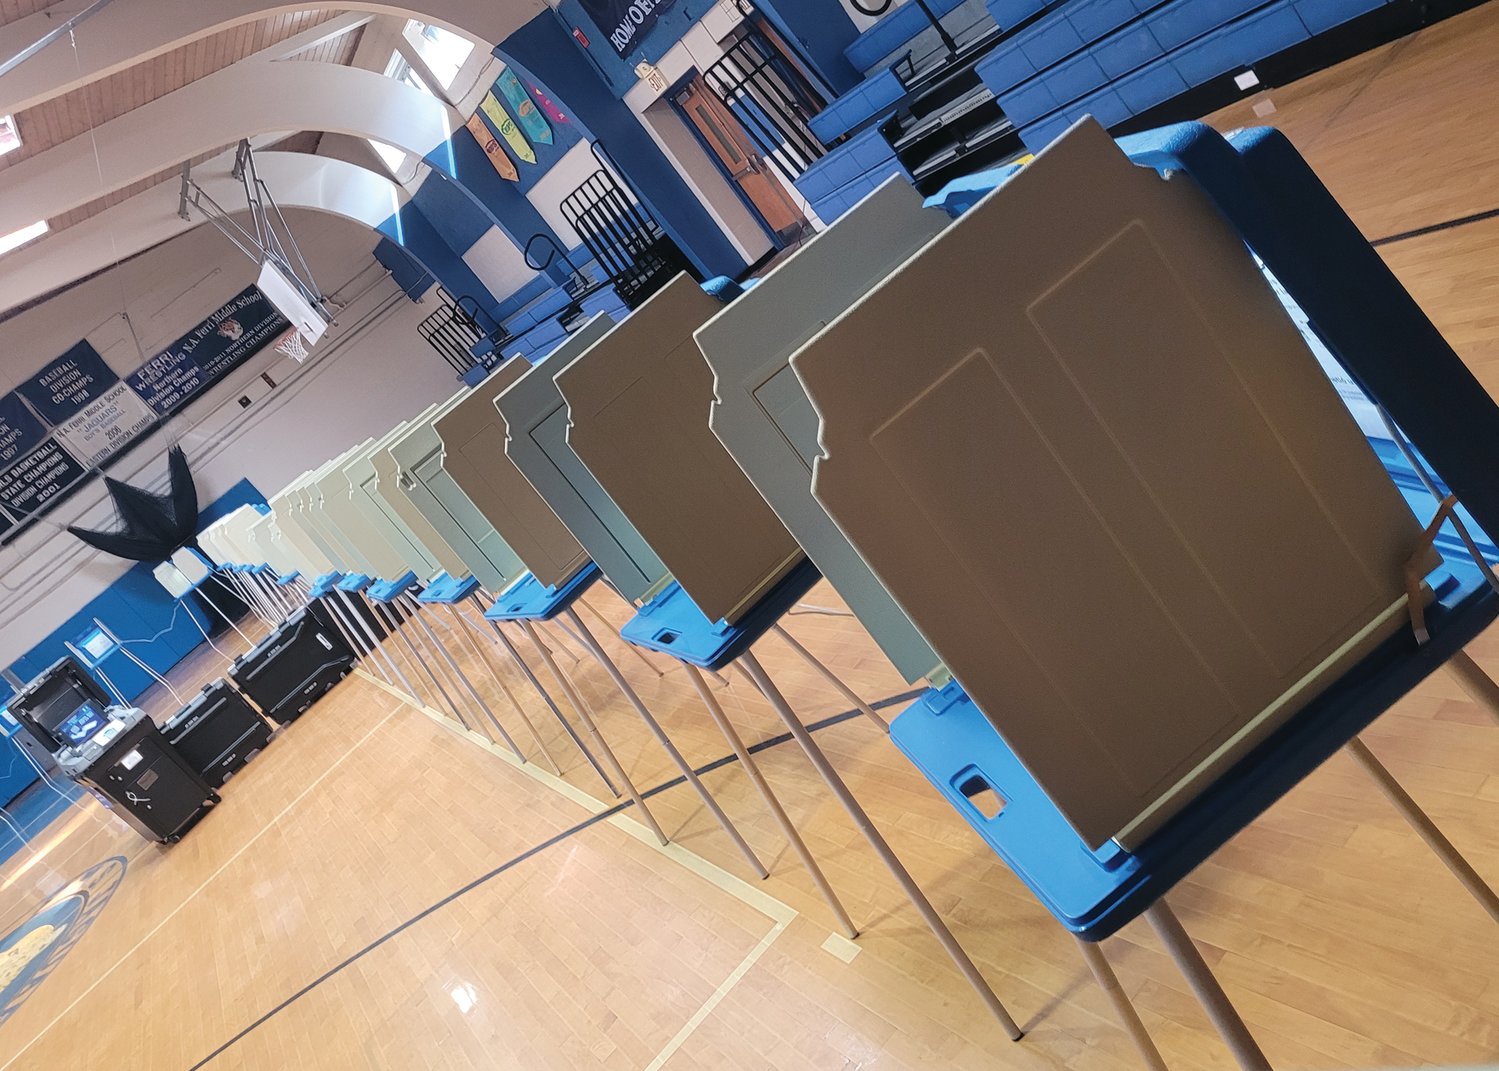 LONELY POLLS: A long row of lonely voting boots sat empty most of the day Tuesday. Only slightly more than 5 percent of Johnston’s nearly 24,000 registered voters turned out to cast ballots.